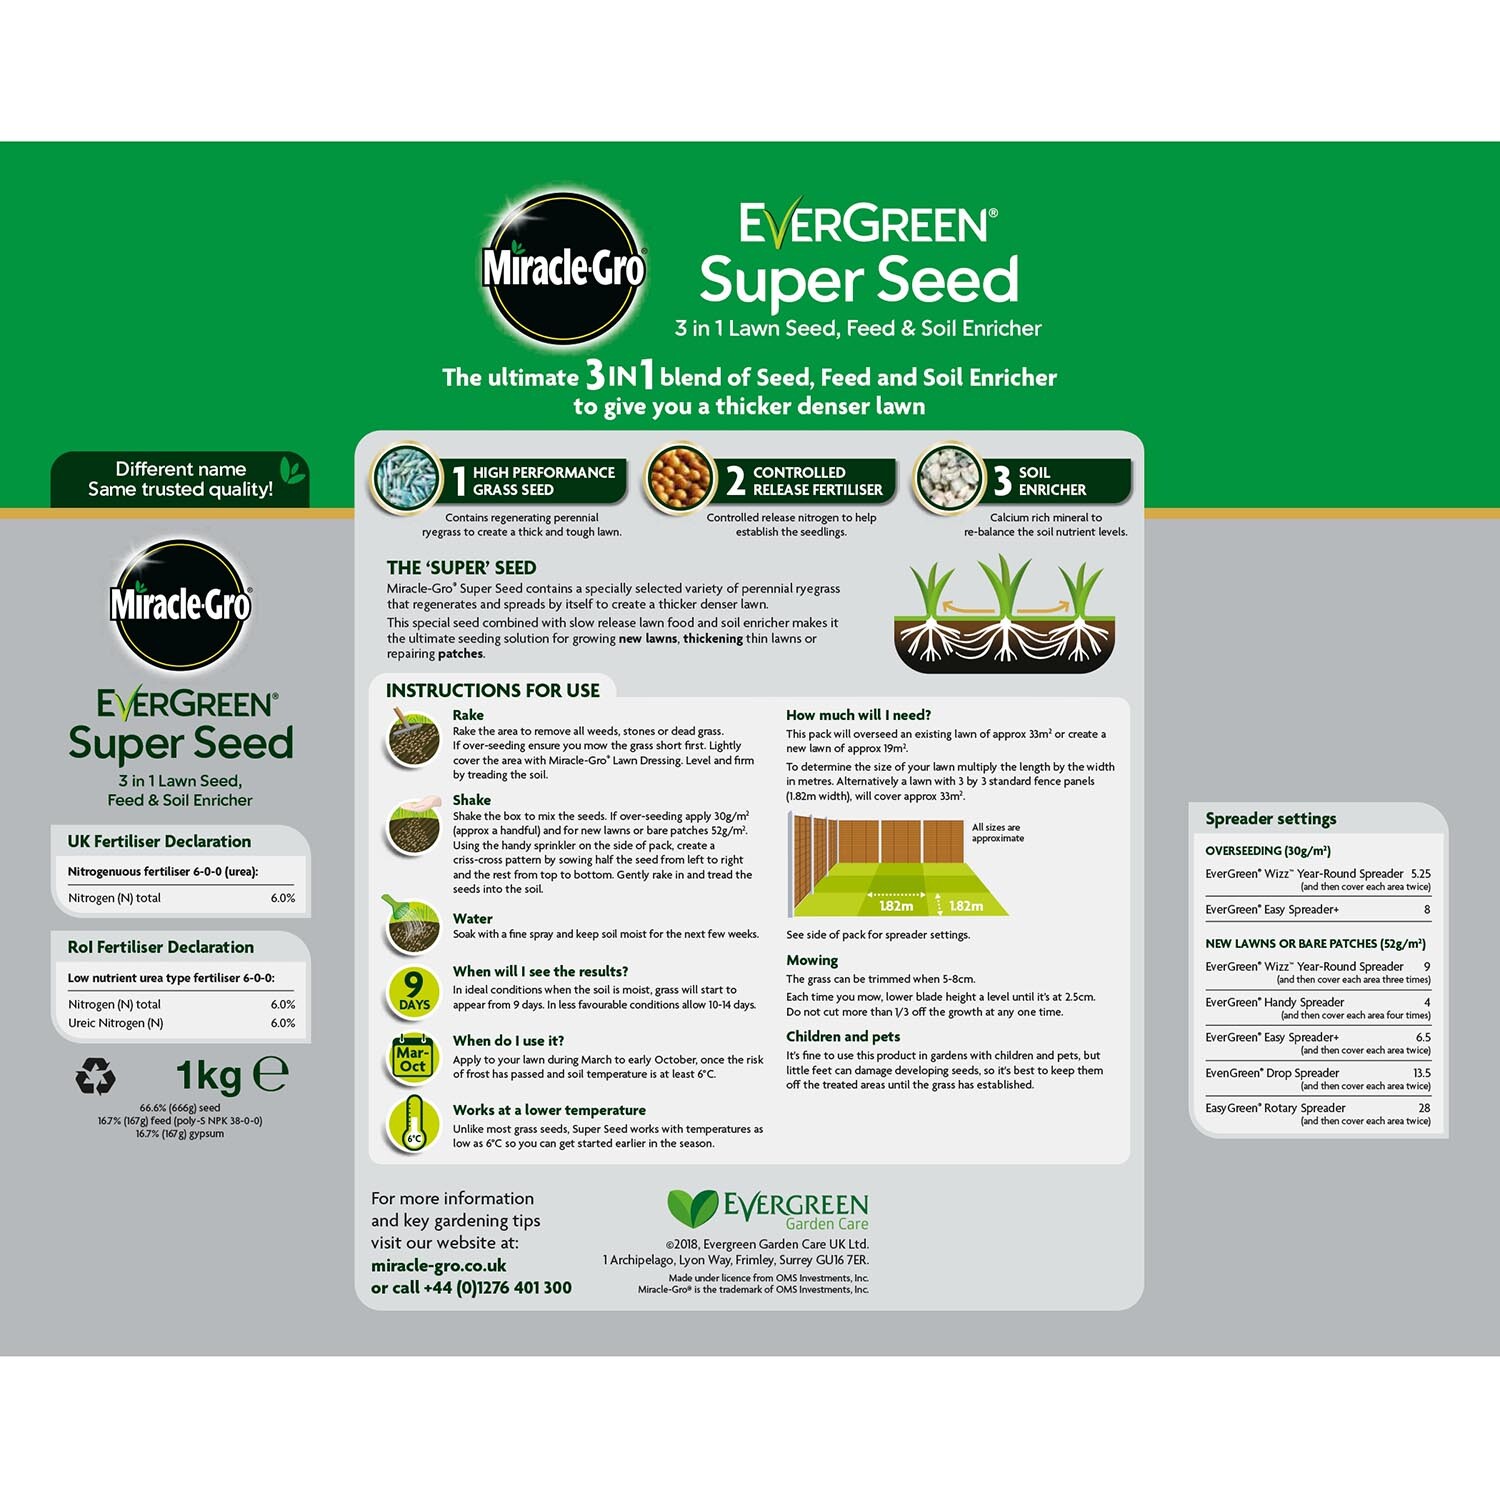 Miracle Gro Evergreen Super Lawn Seed Image 2